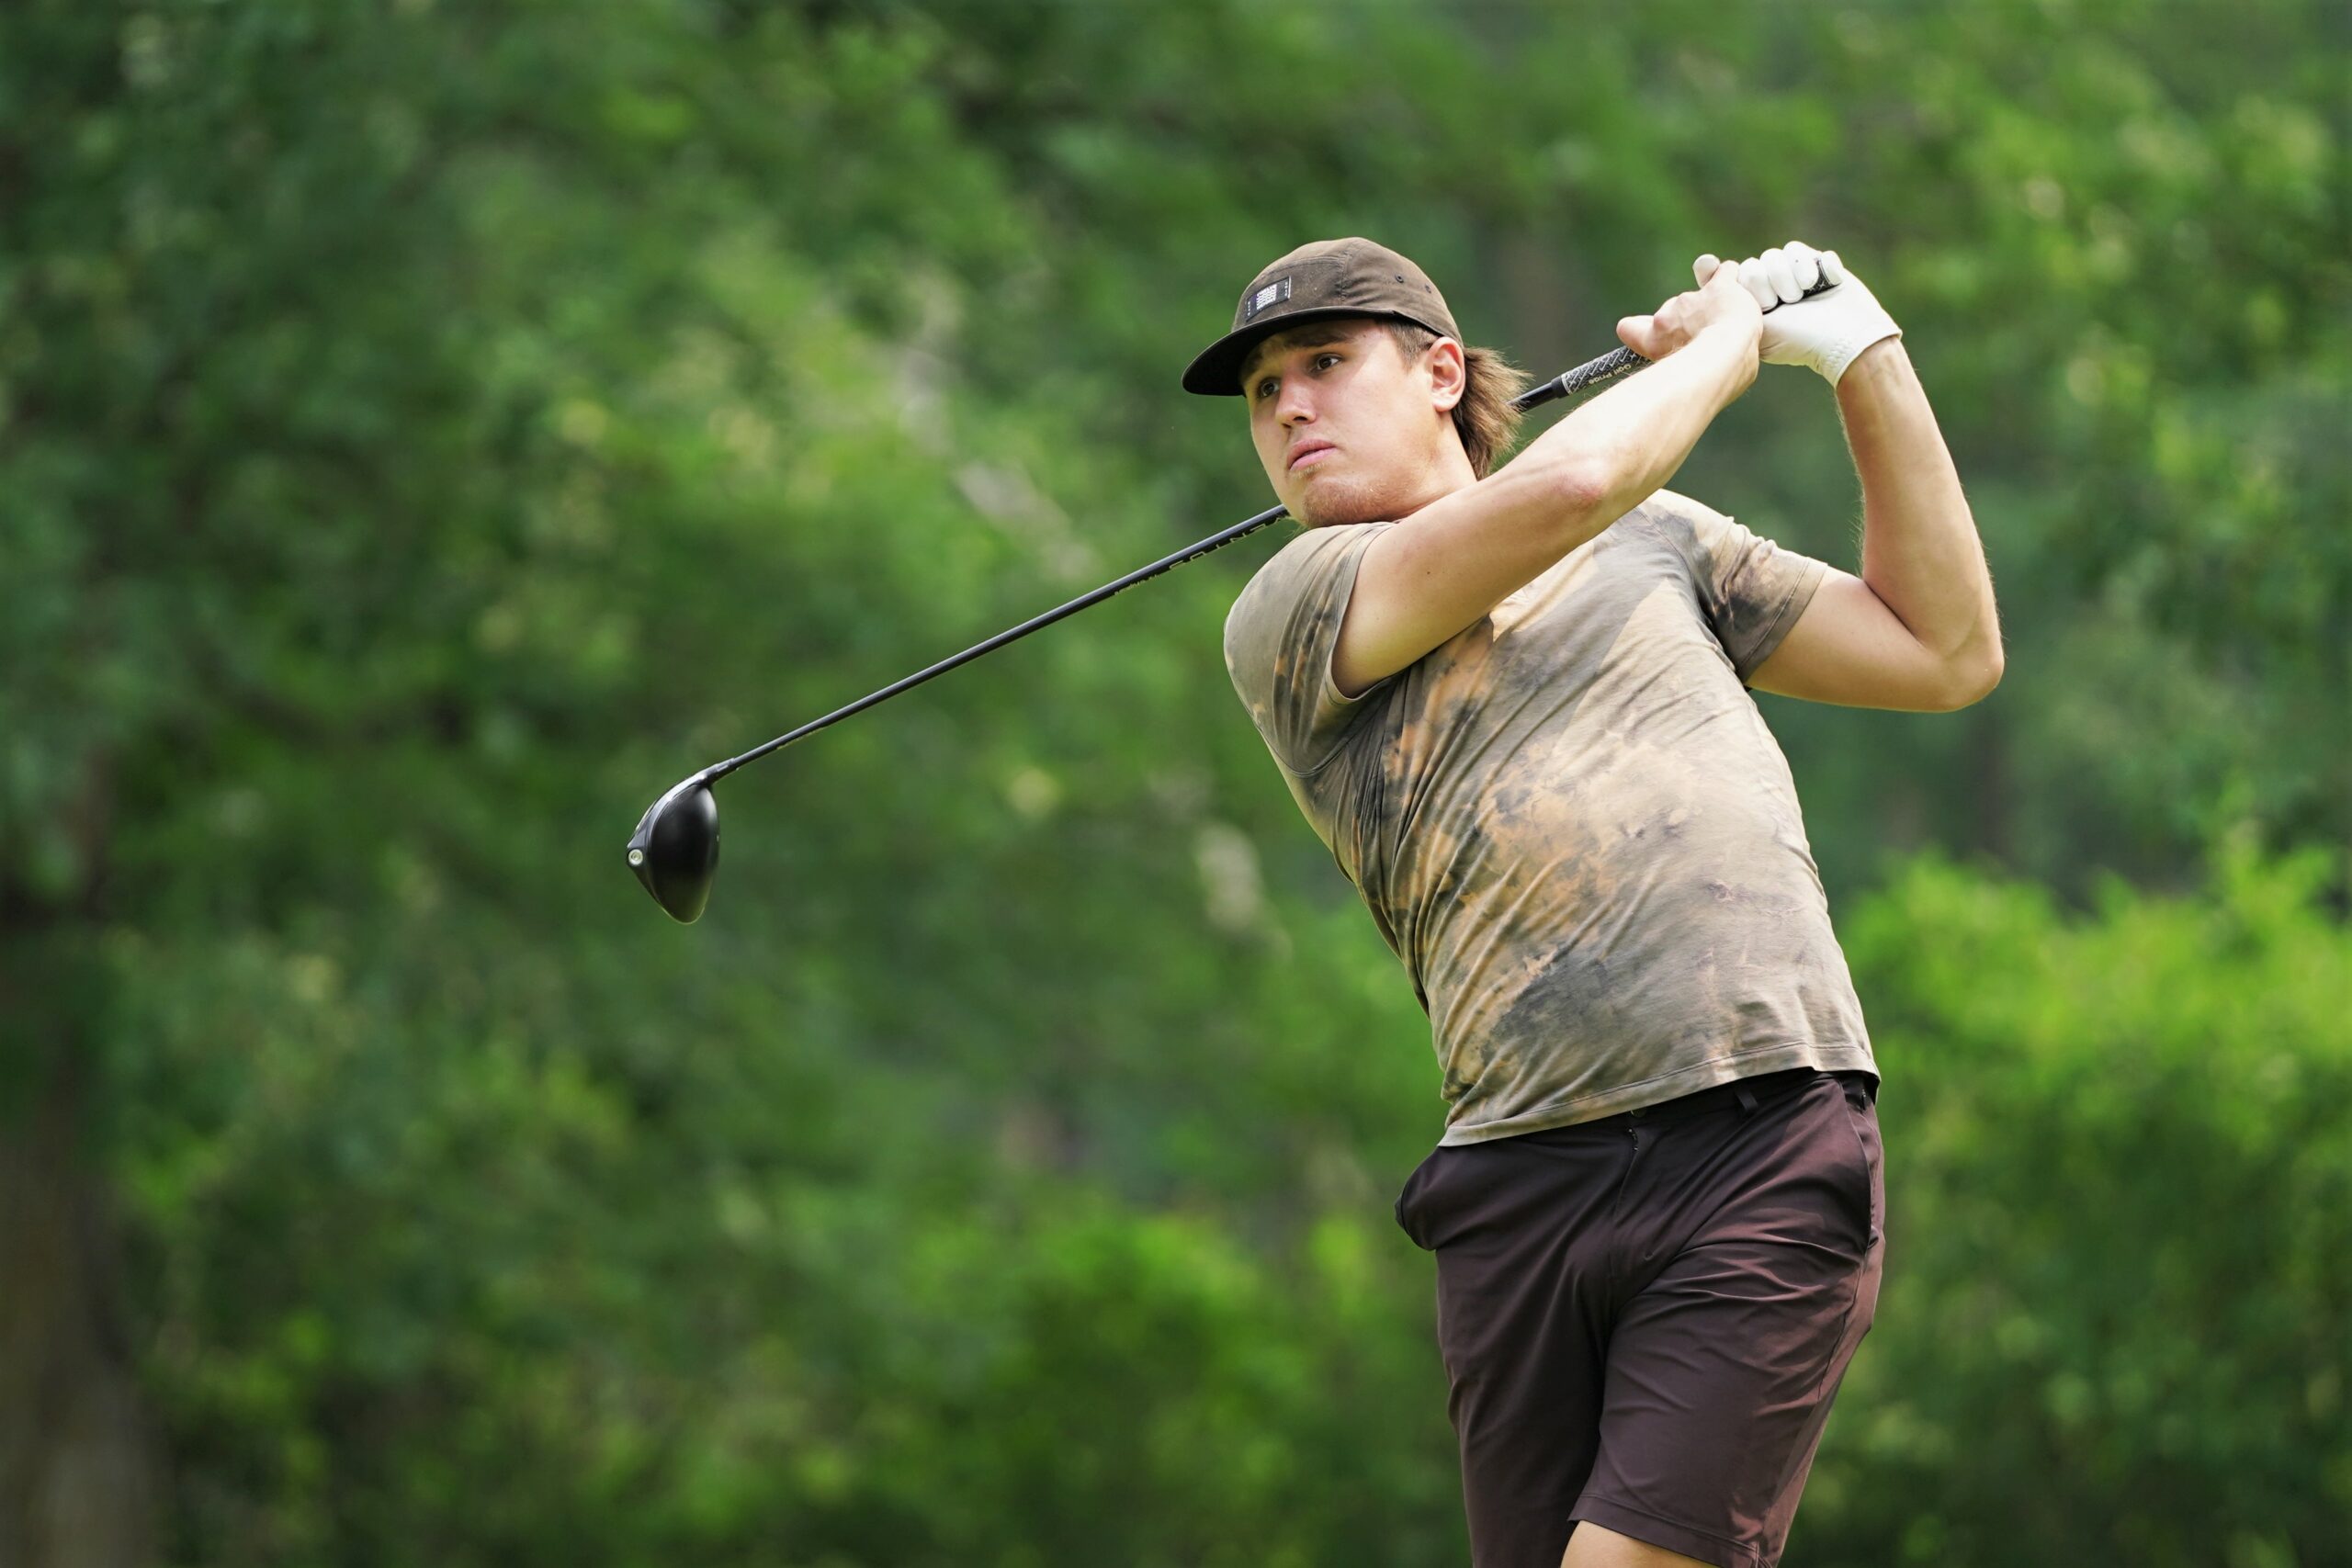 Zach Whitecloud tees off from hole No. 3 during the 26th annual Galen Nagle Memorial Golf Tournament on Friday, July 14, 2023, at the Bemidji Town and Country Club. (Micah Friez / Bemidji State)